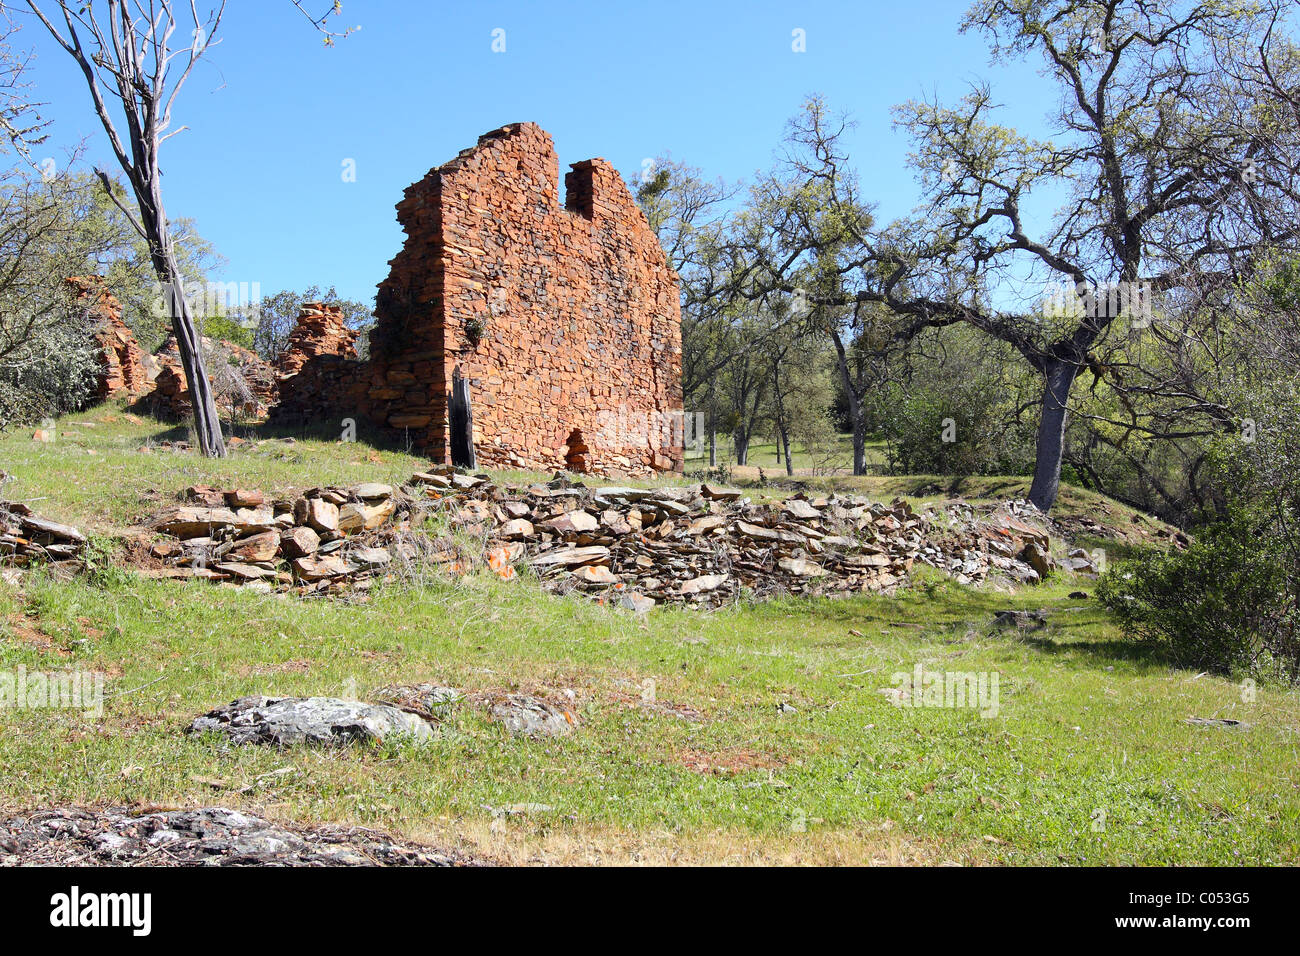 Lost City is located in the California foothills in Calaveras County. Stock Photo